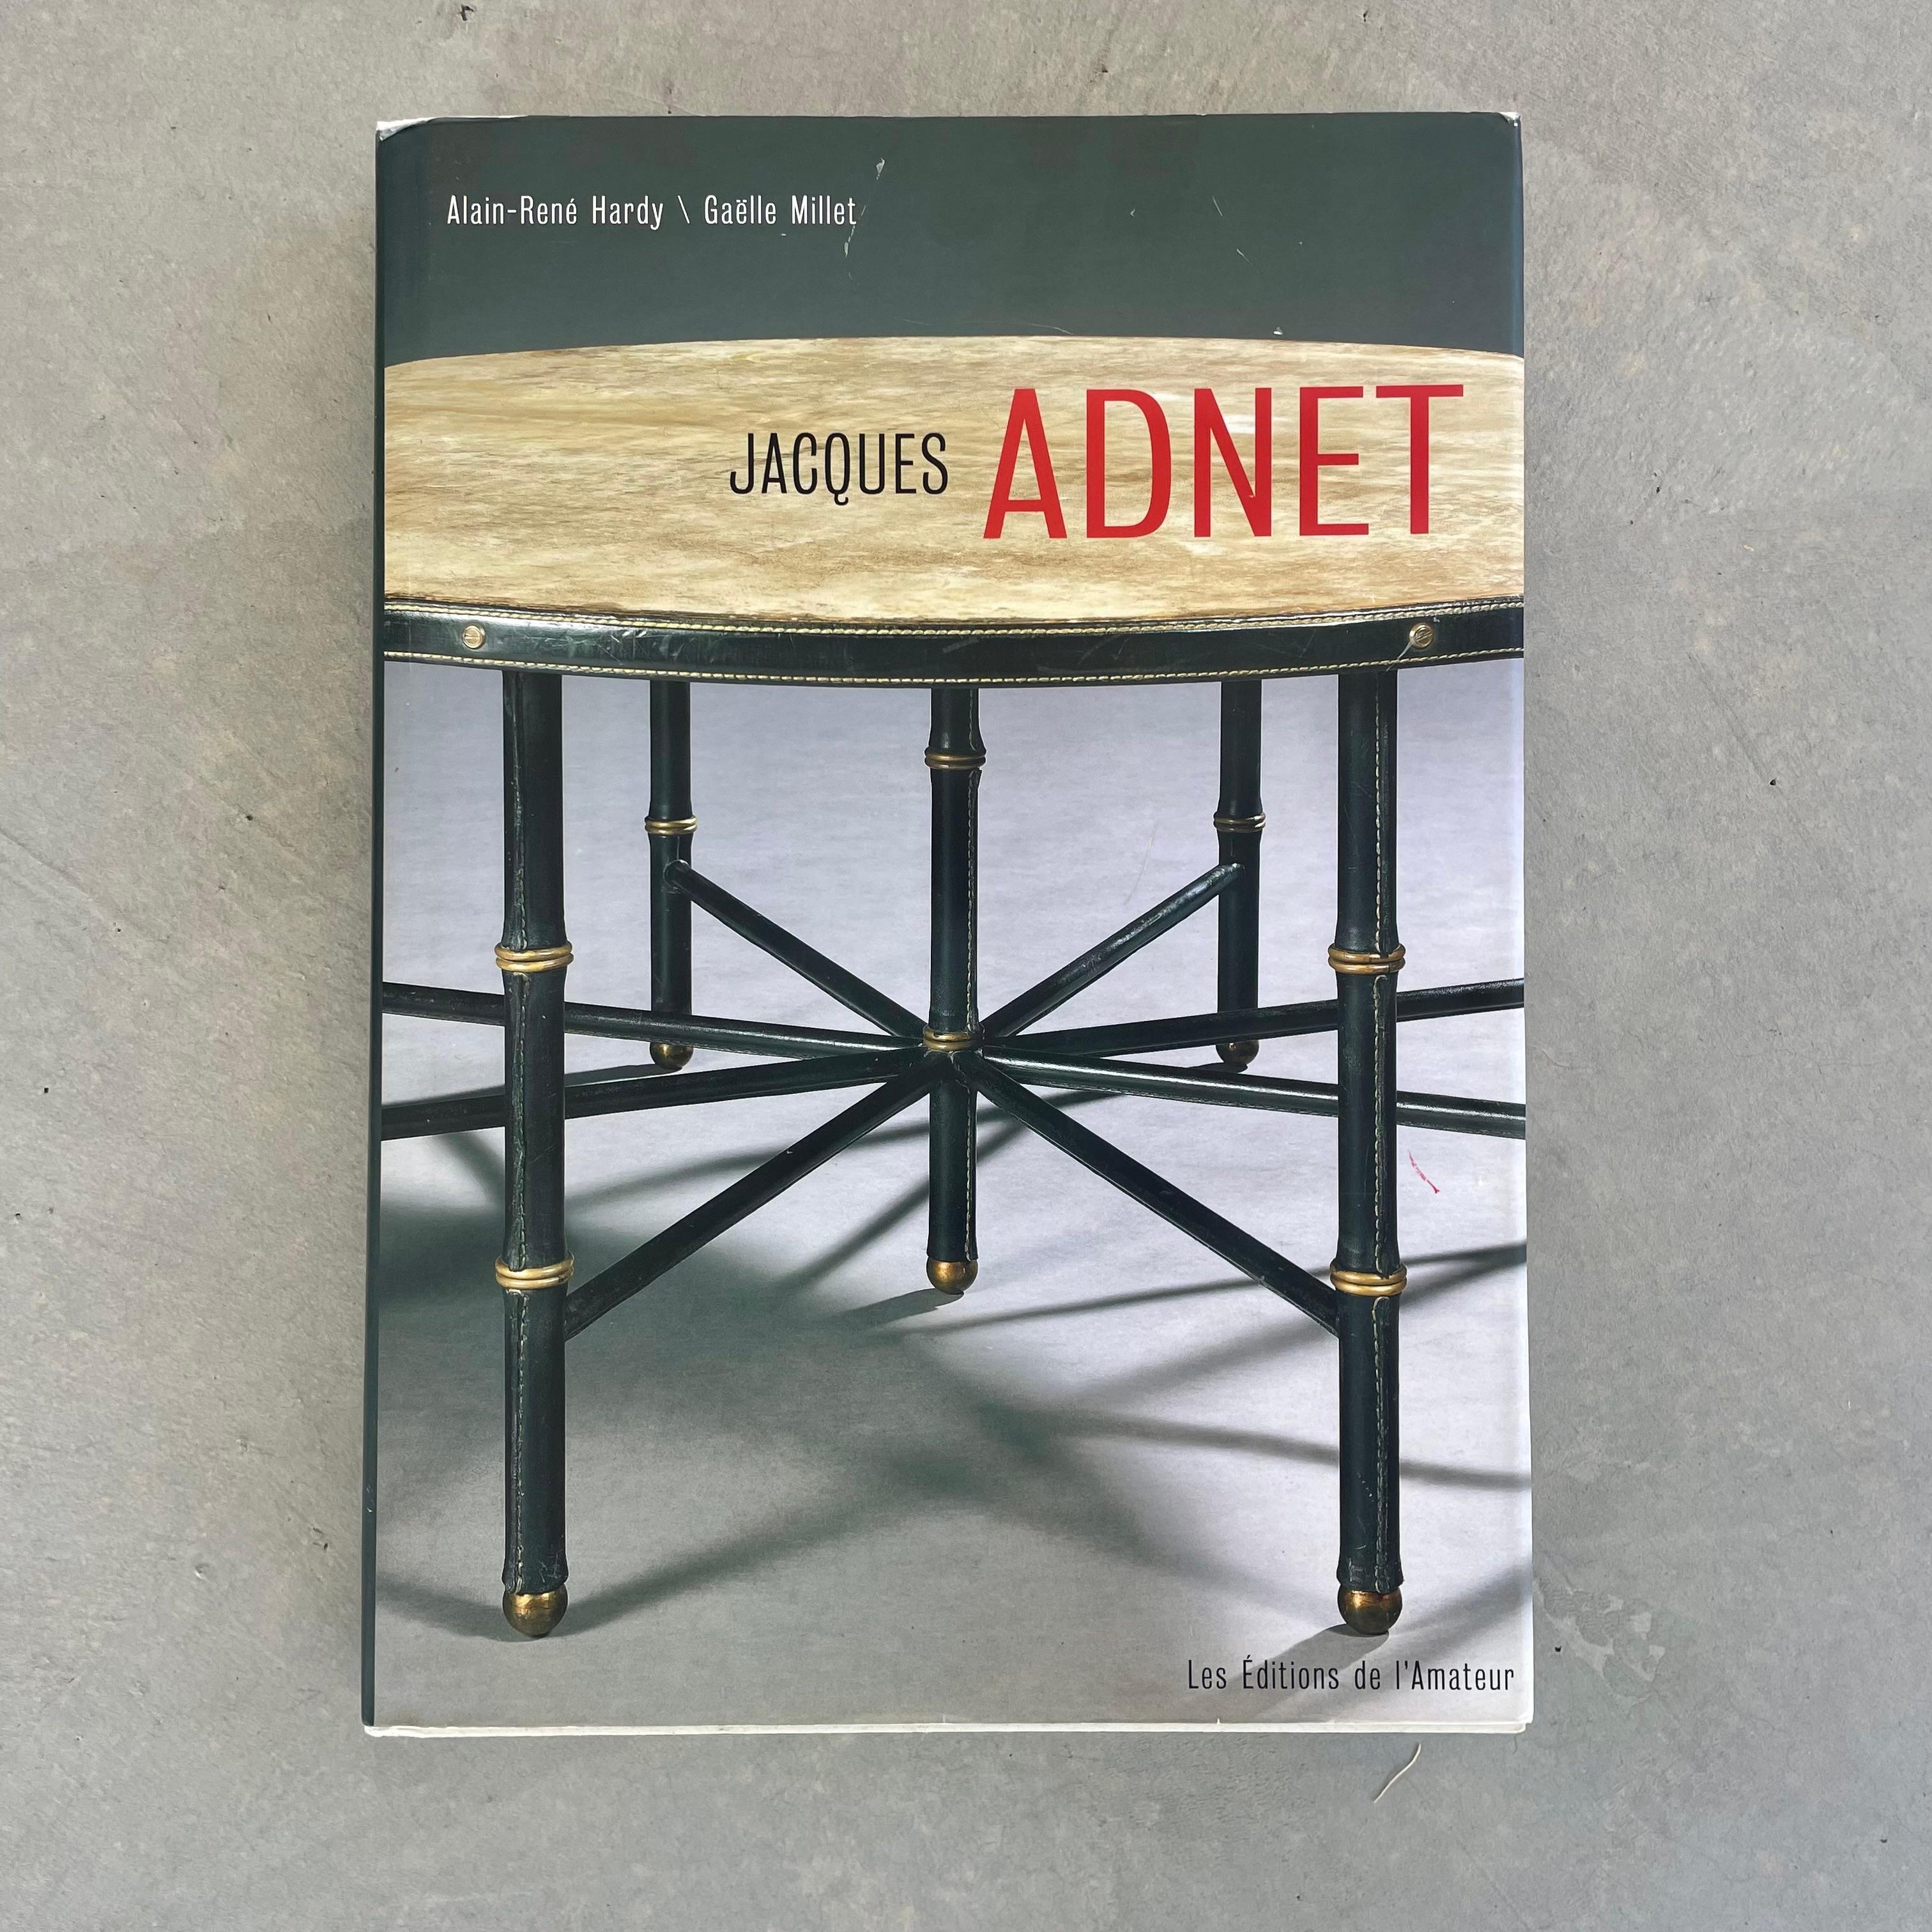 First Edition Jacques Adnet Book by Gaelle Millet & Alain-Rene Hardy. 260 Page book on the life and legacy of one of the most prolific French designers of the 20th century, Jacques Adnet. Written in French but contains universally understood beauty